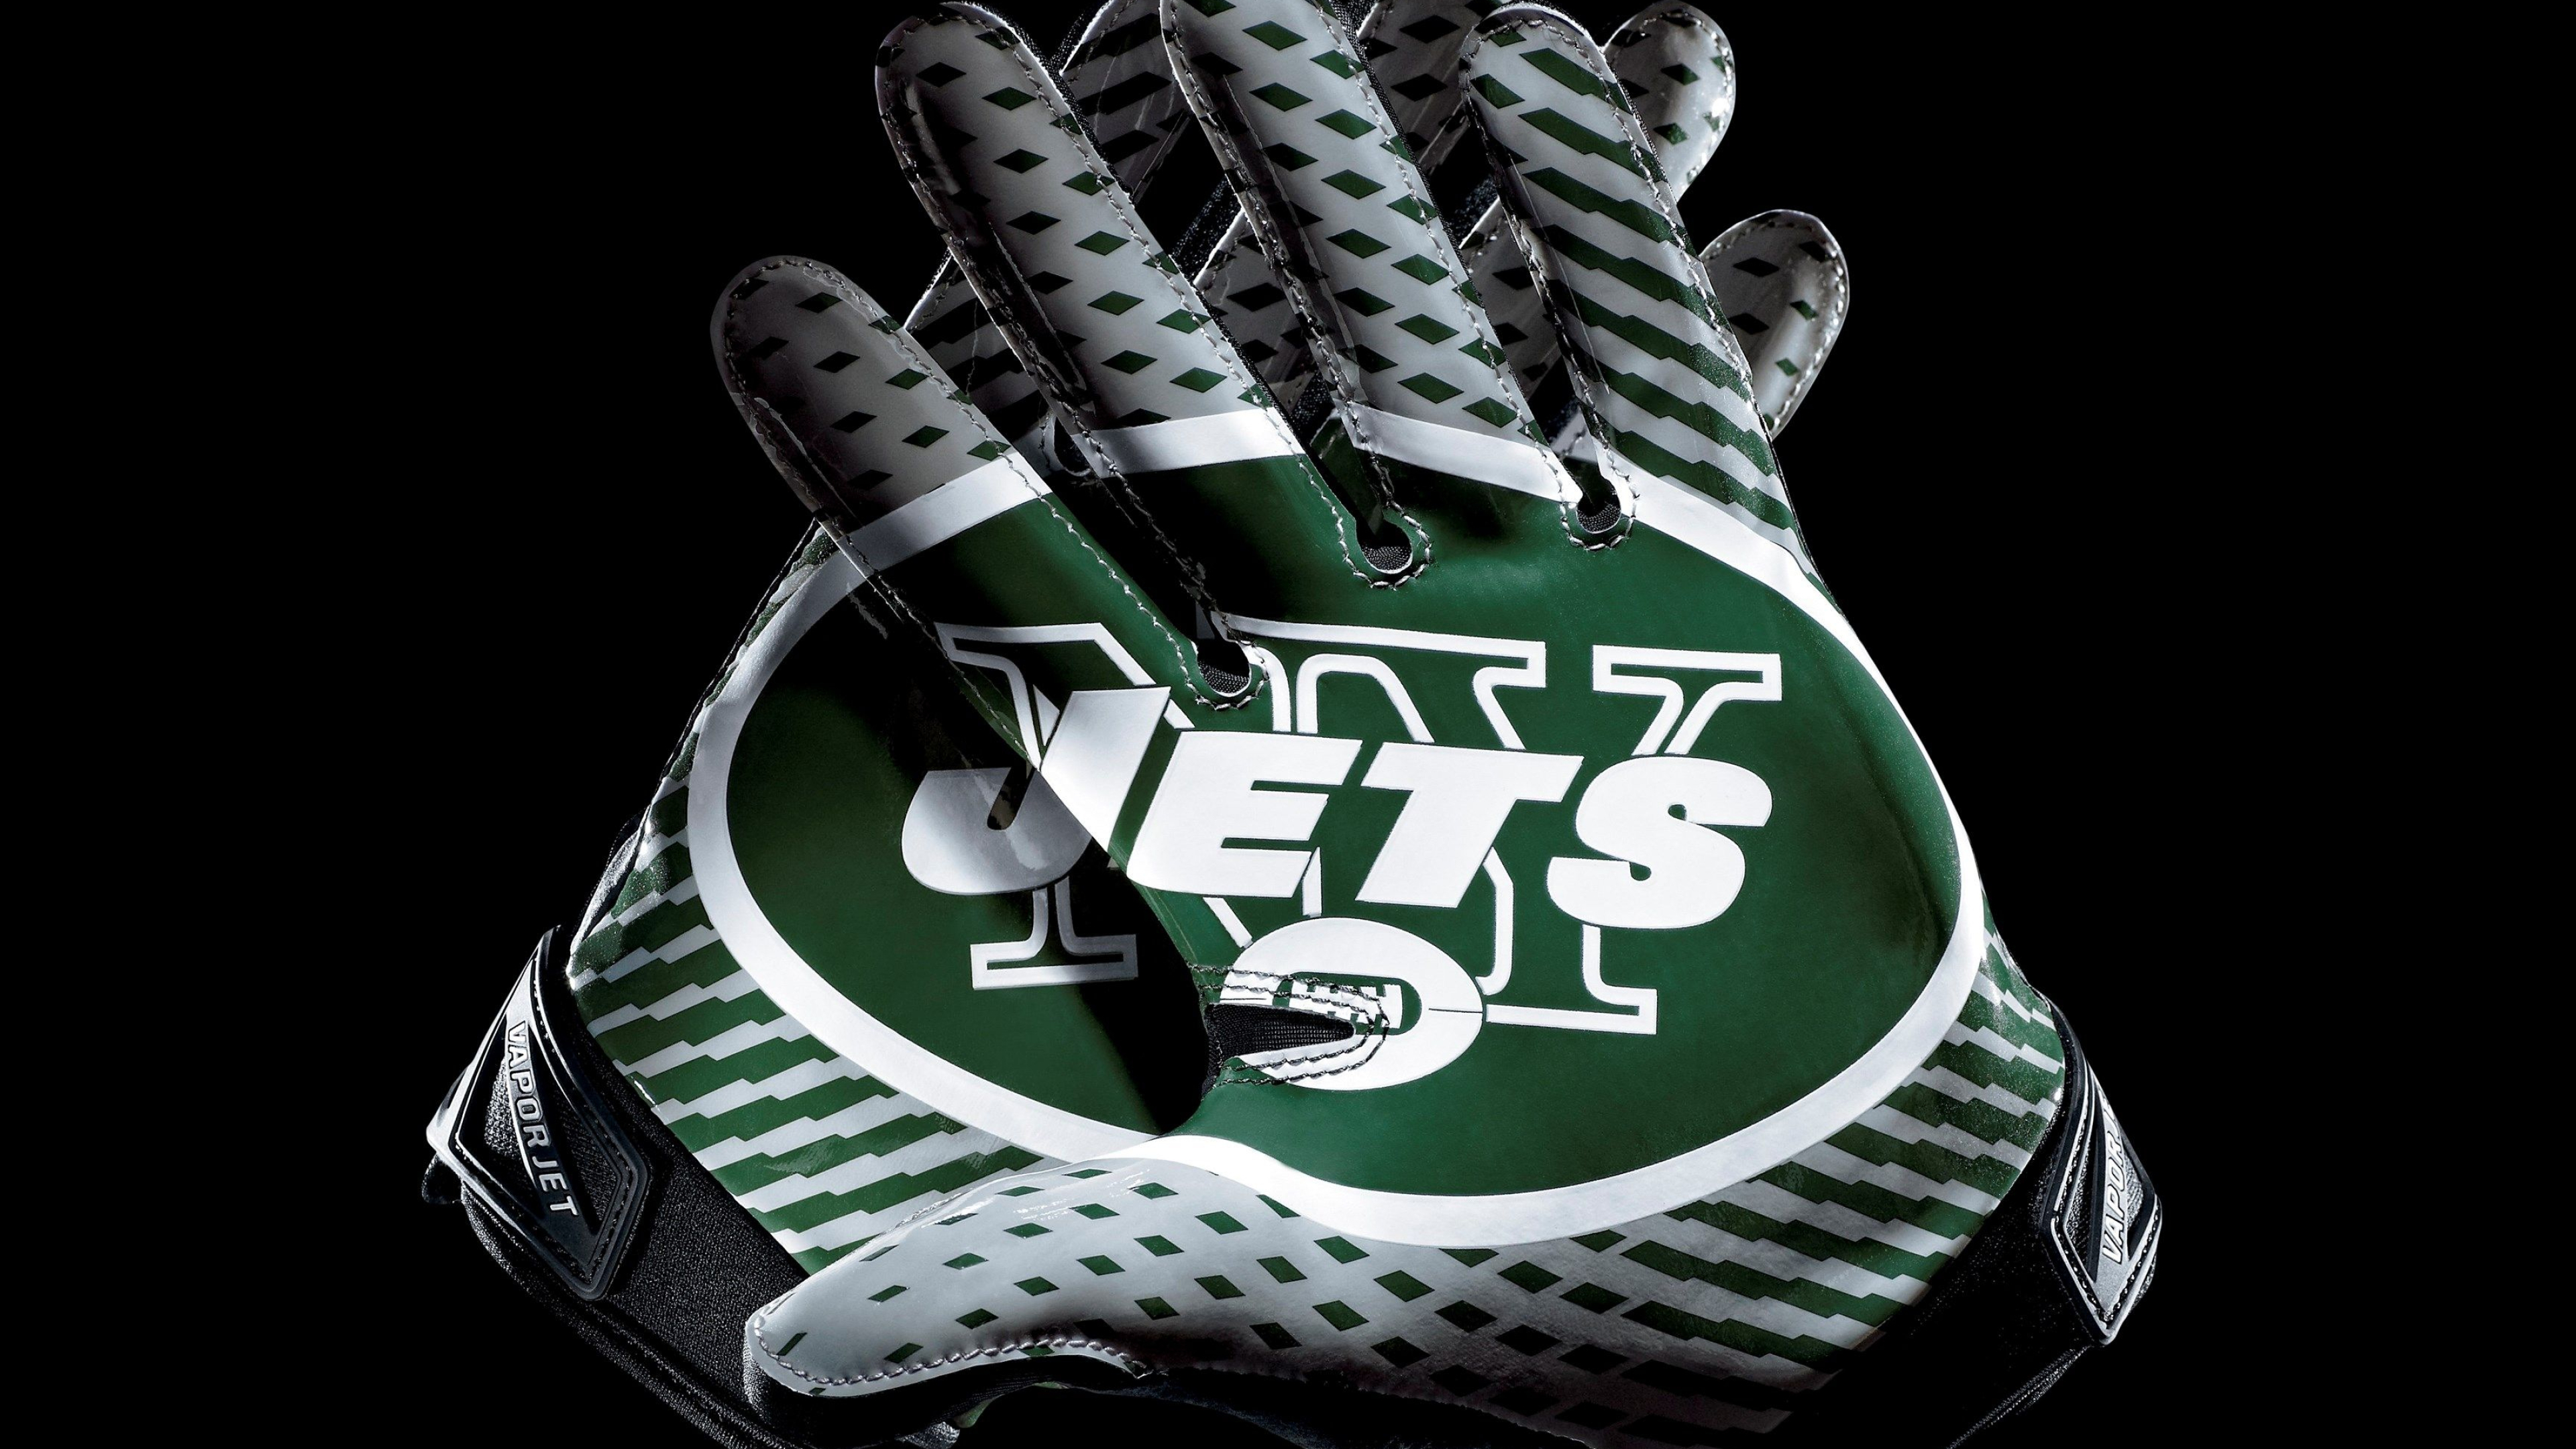 3840x2160 New York Jets Logo Wallpapers Top Free New York Jets Logo Backgrounds